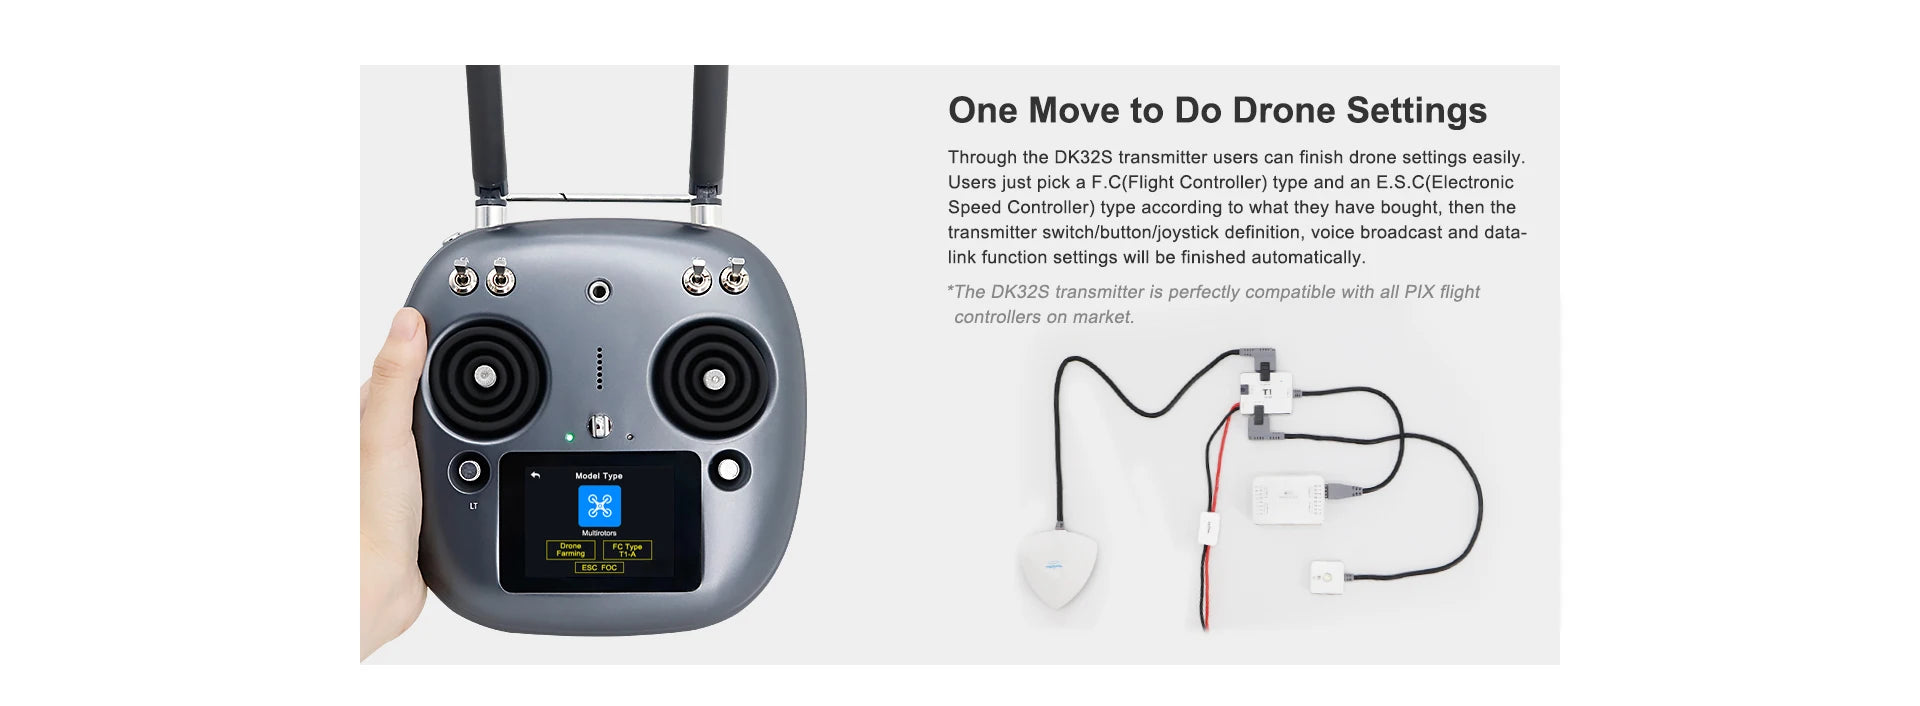 the DK32S transmitter is perfectly compatible with all PIX flight controllers on market